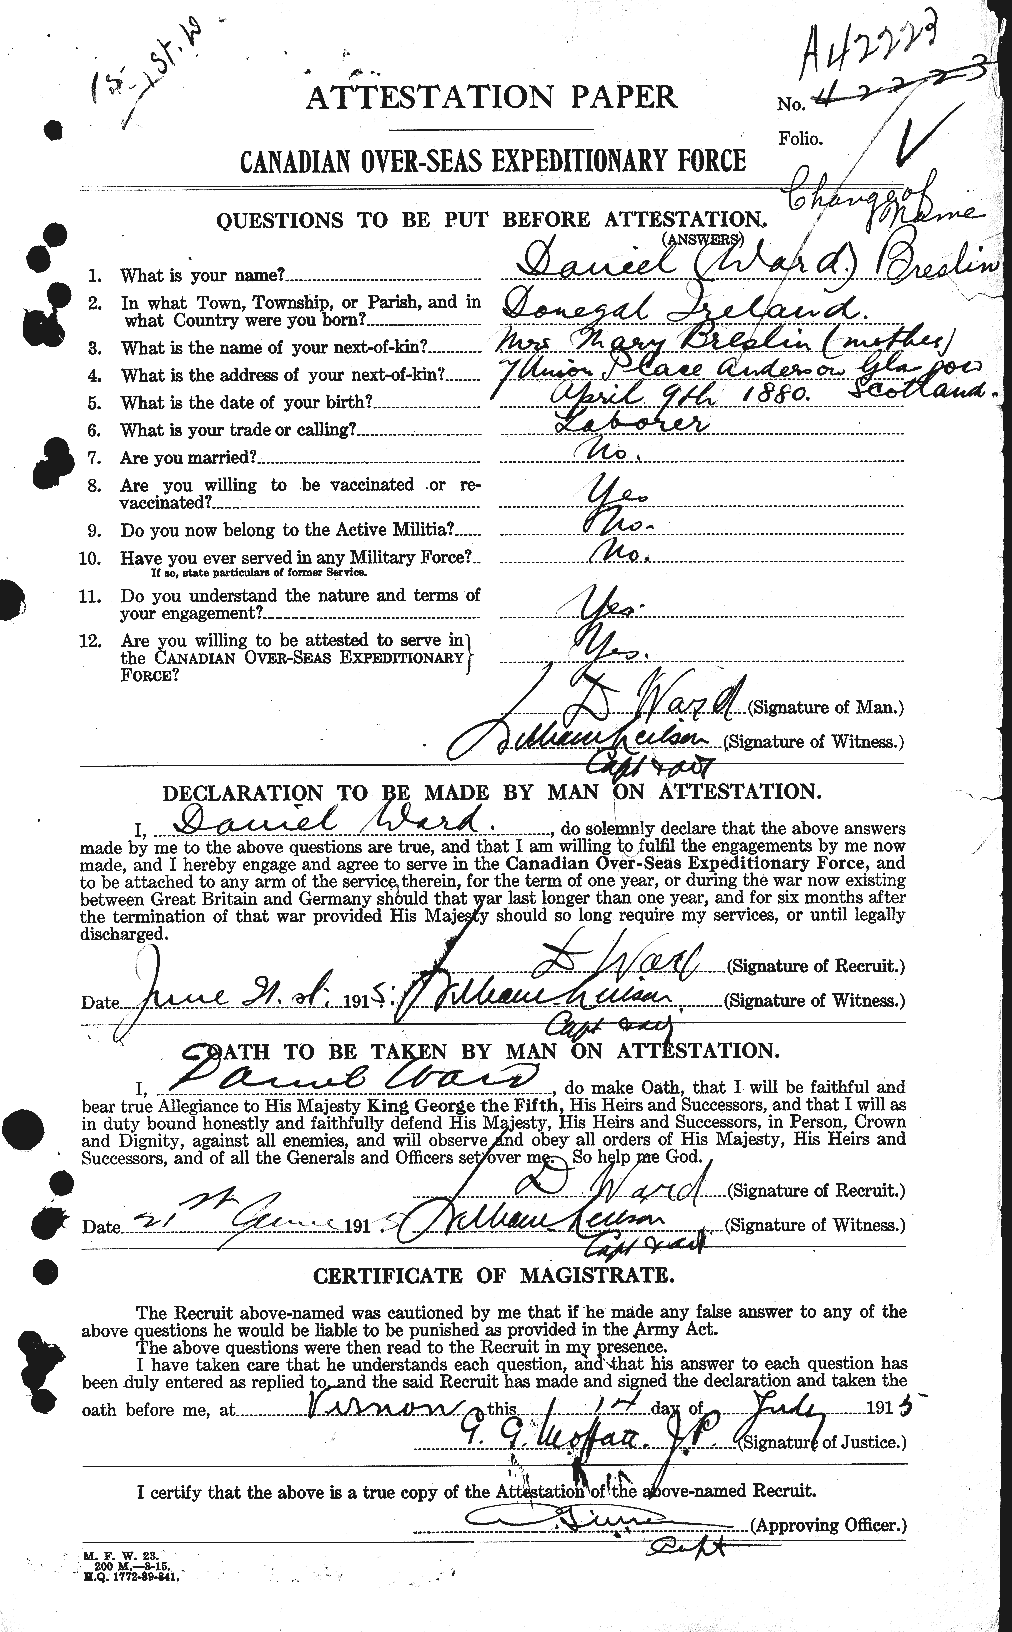 Personnel Records of the First World War - CEF 690920a